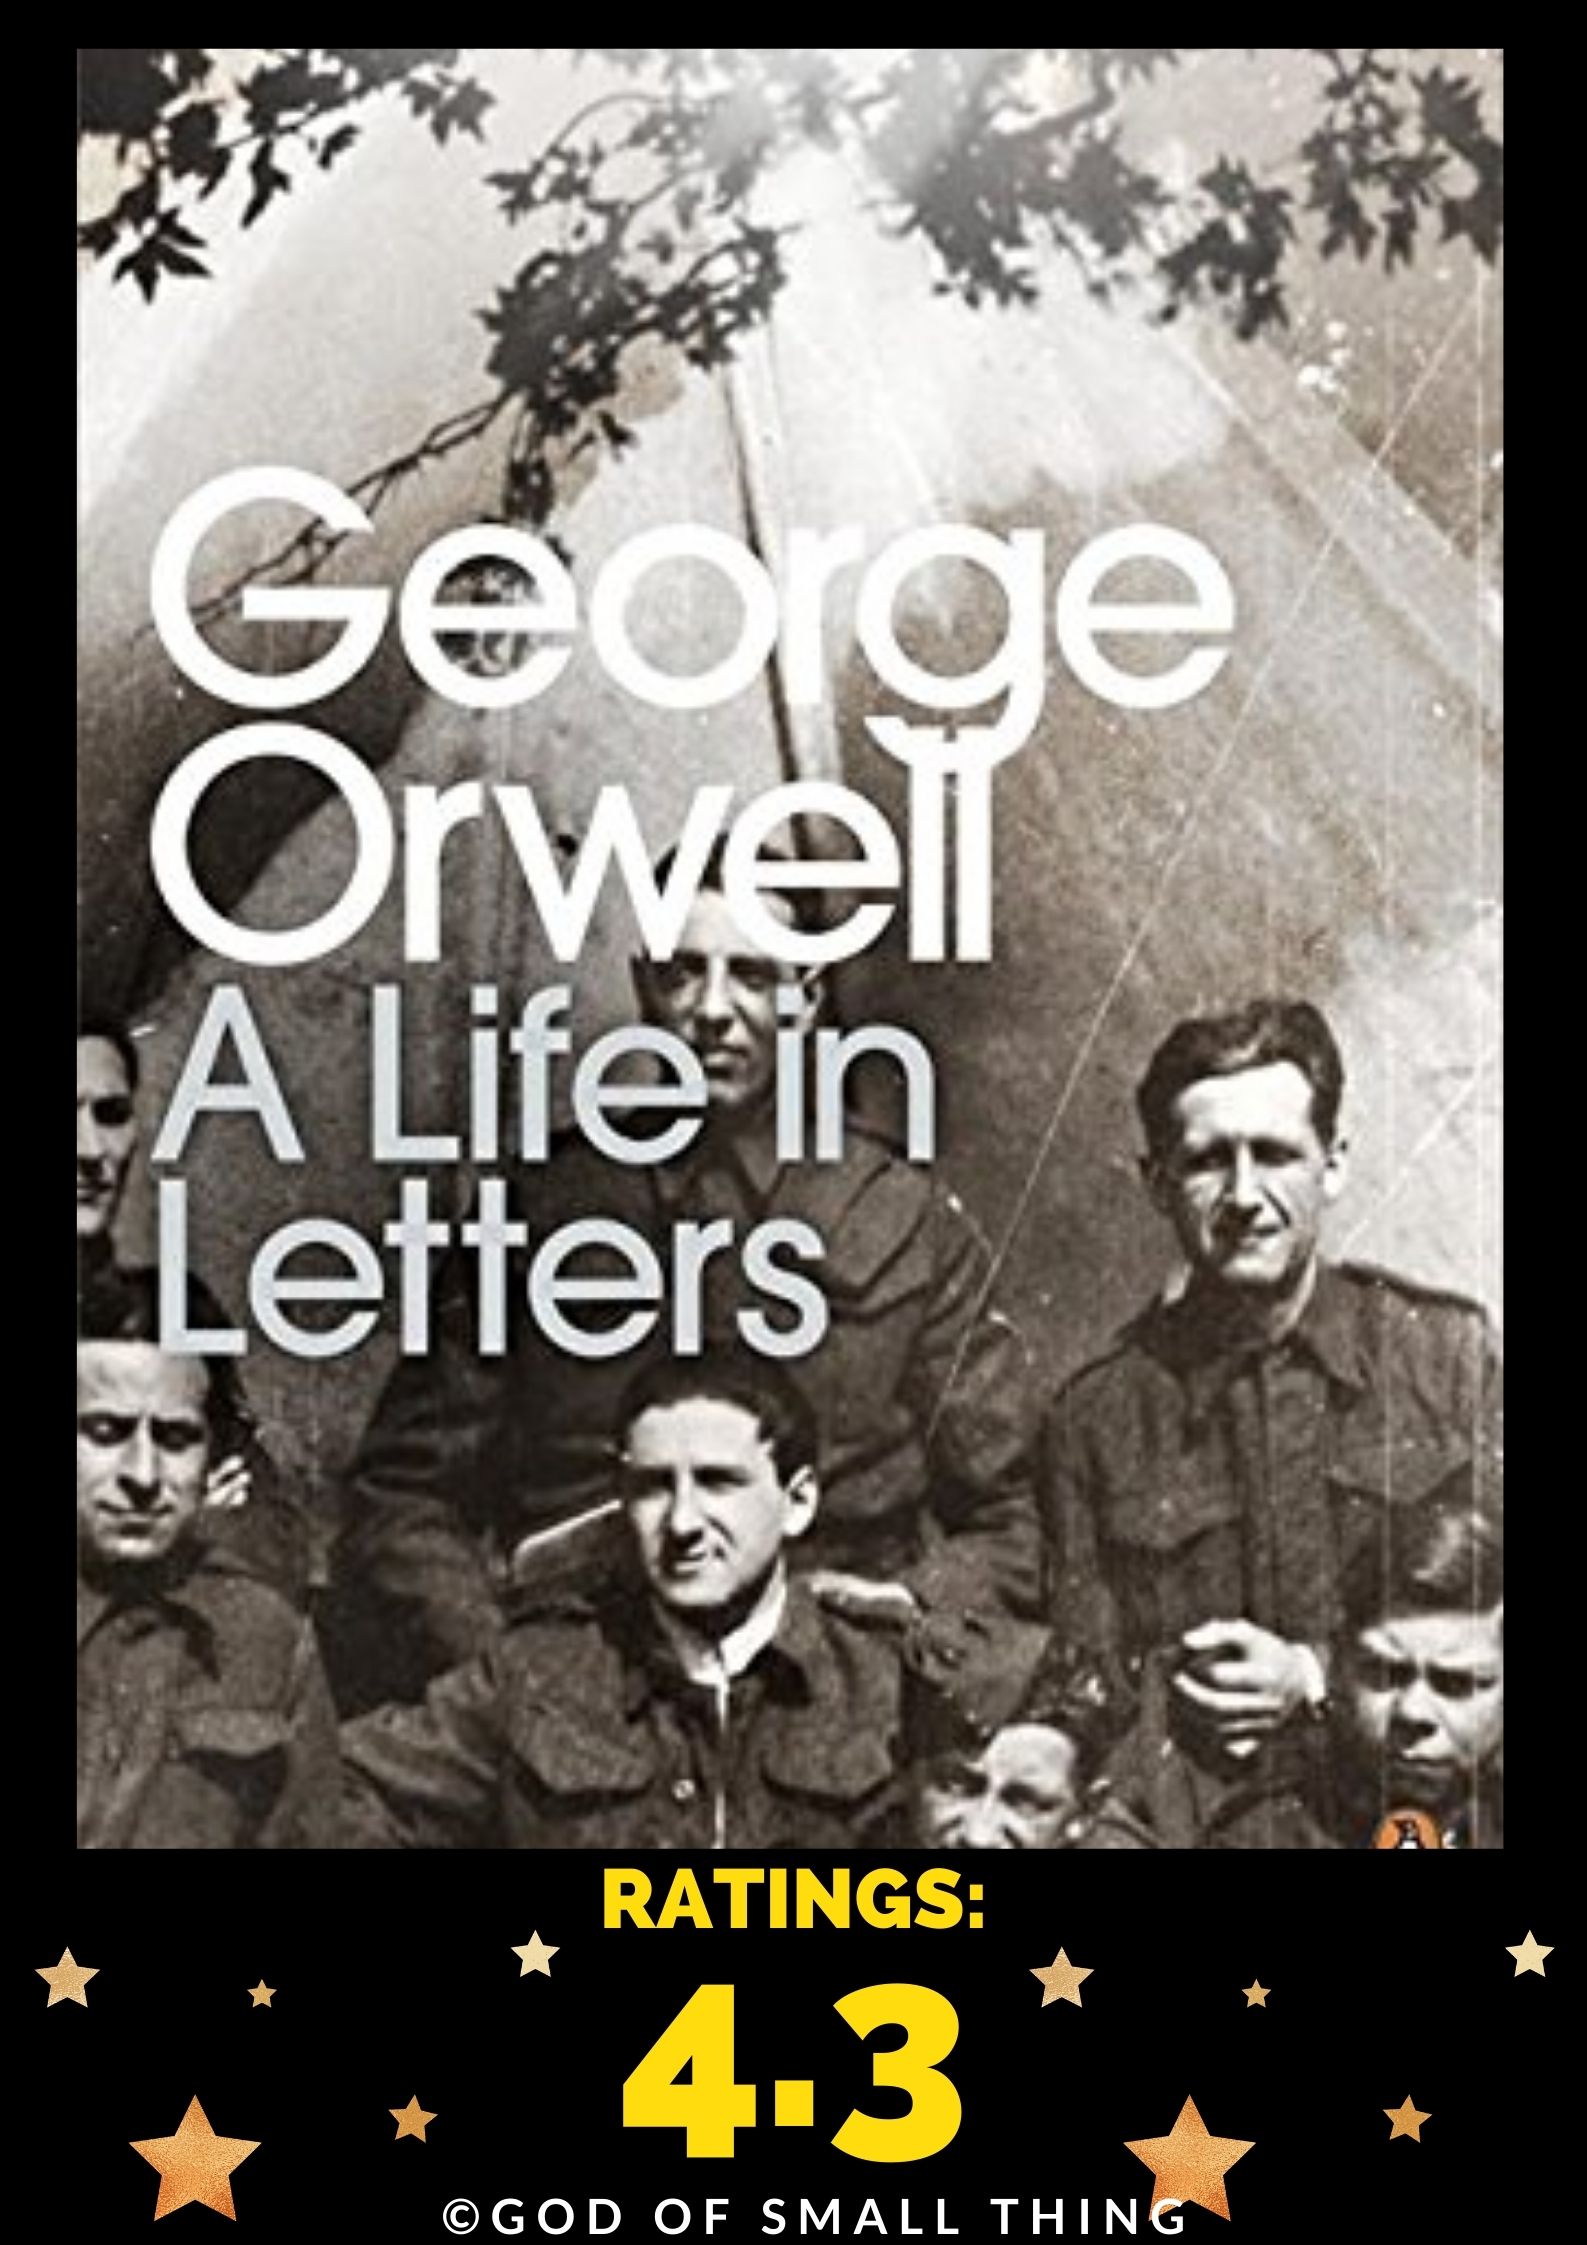 A Life in Letters book by George Orwell (1)